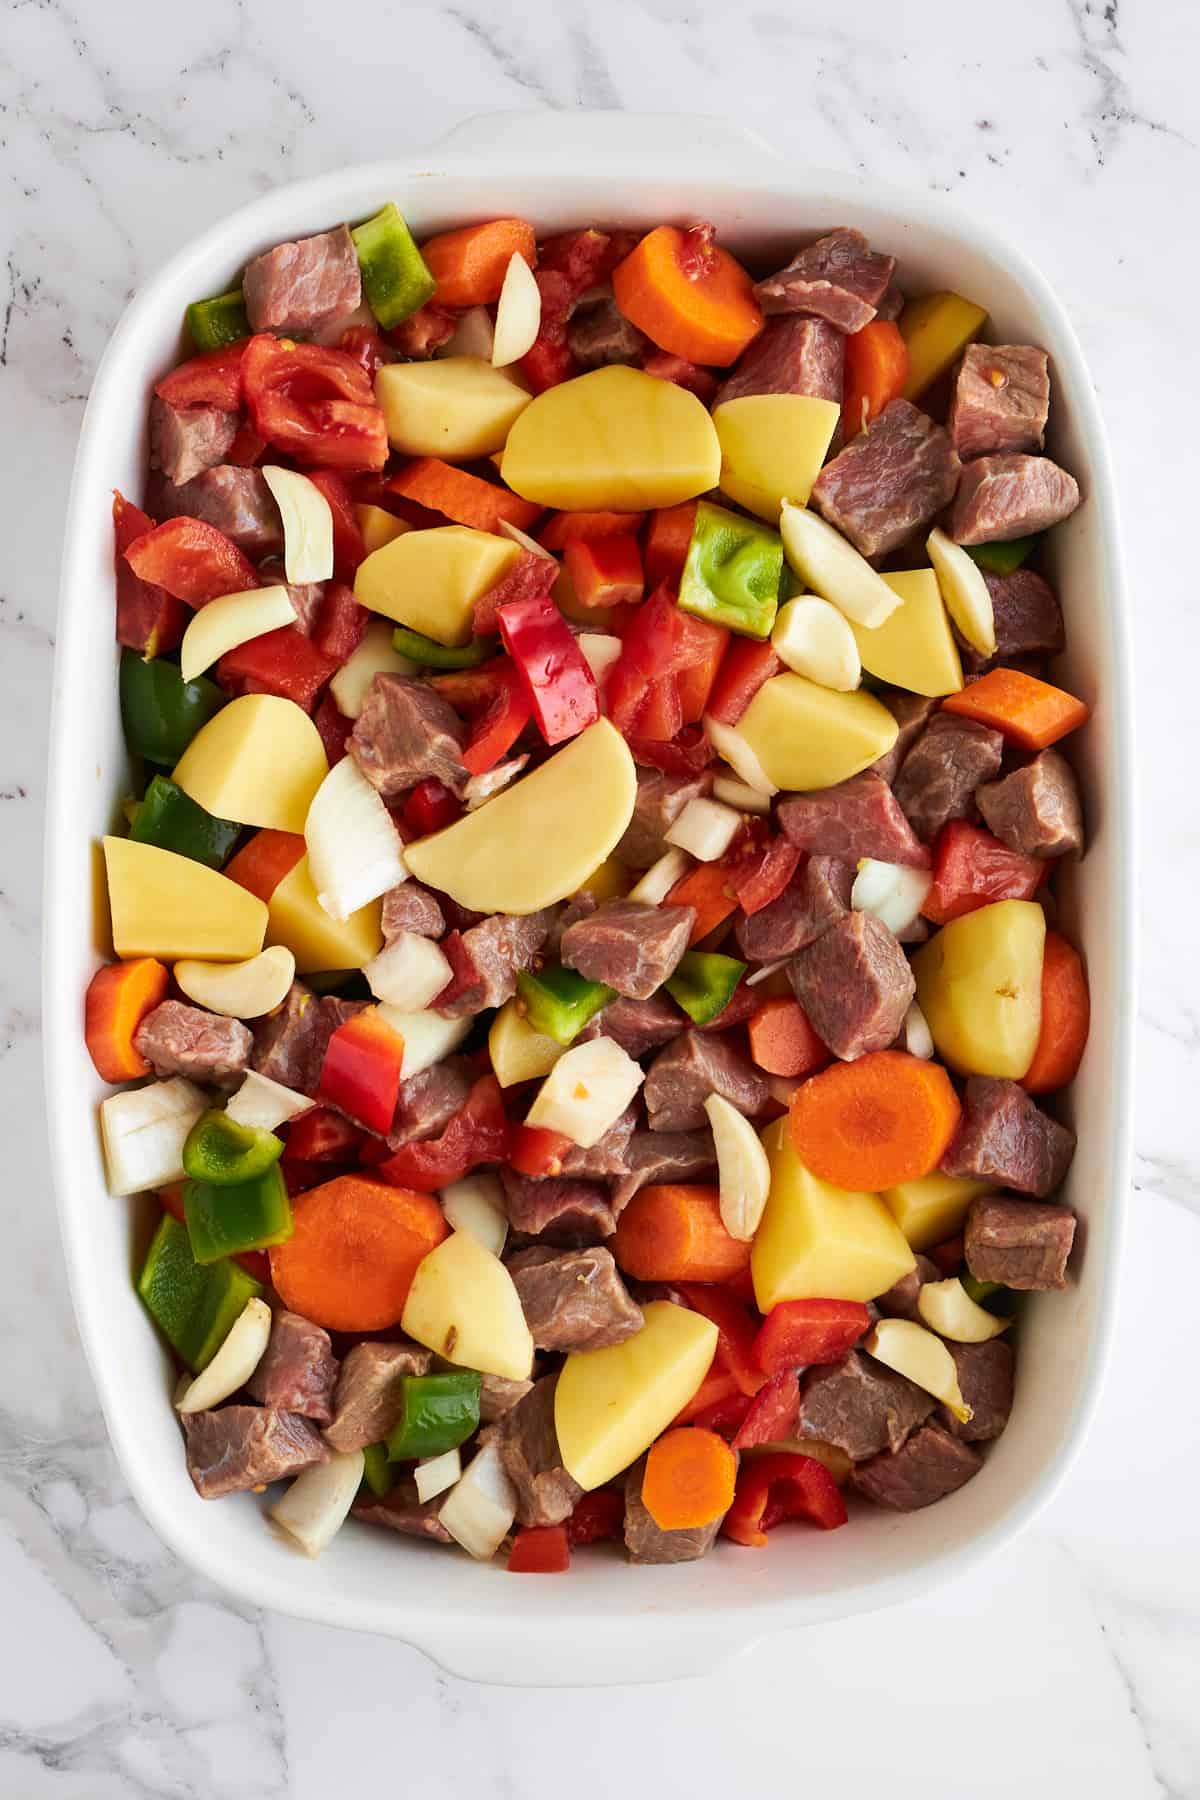 Beef cubes and vegetables in a baking dish.